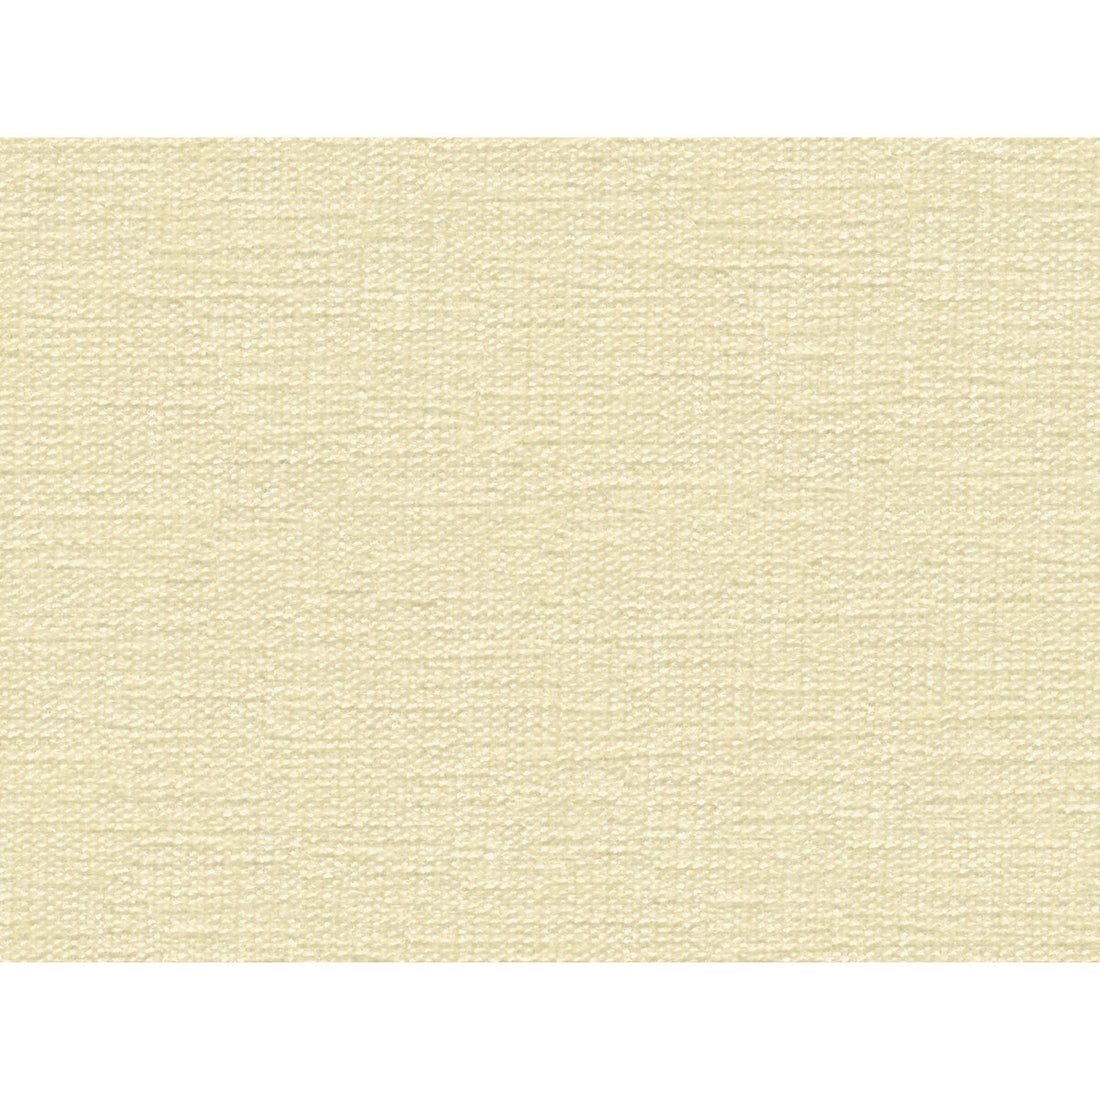 Kravet Contract fabric in 34961-1001 color - pattern 34961.1001.0 - by Kravet Contract in the Performance Kravetarmor collection